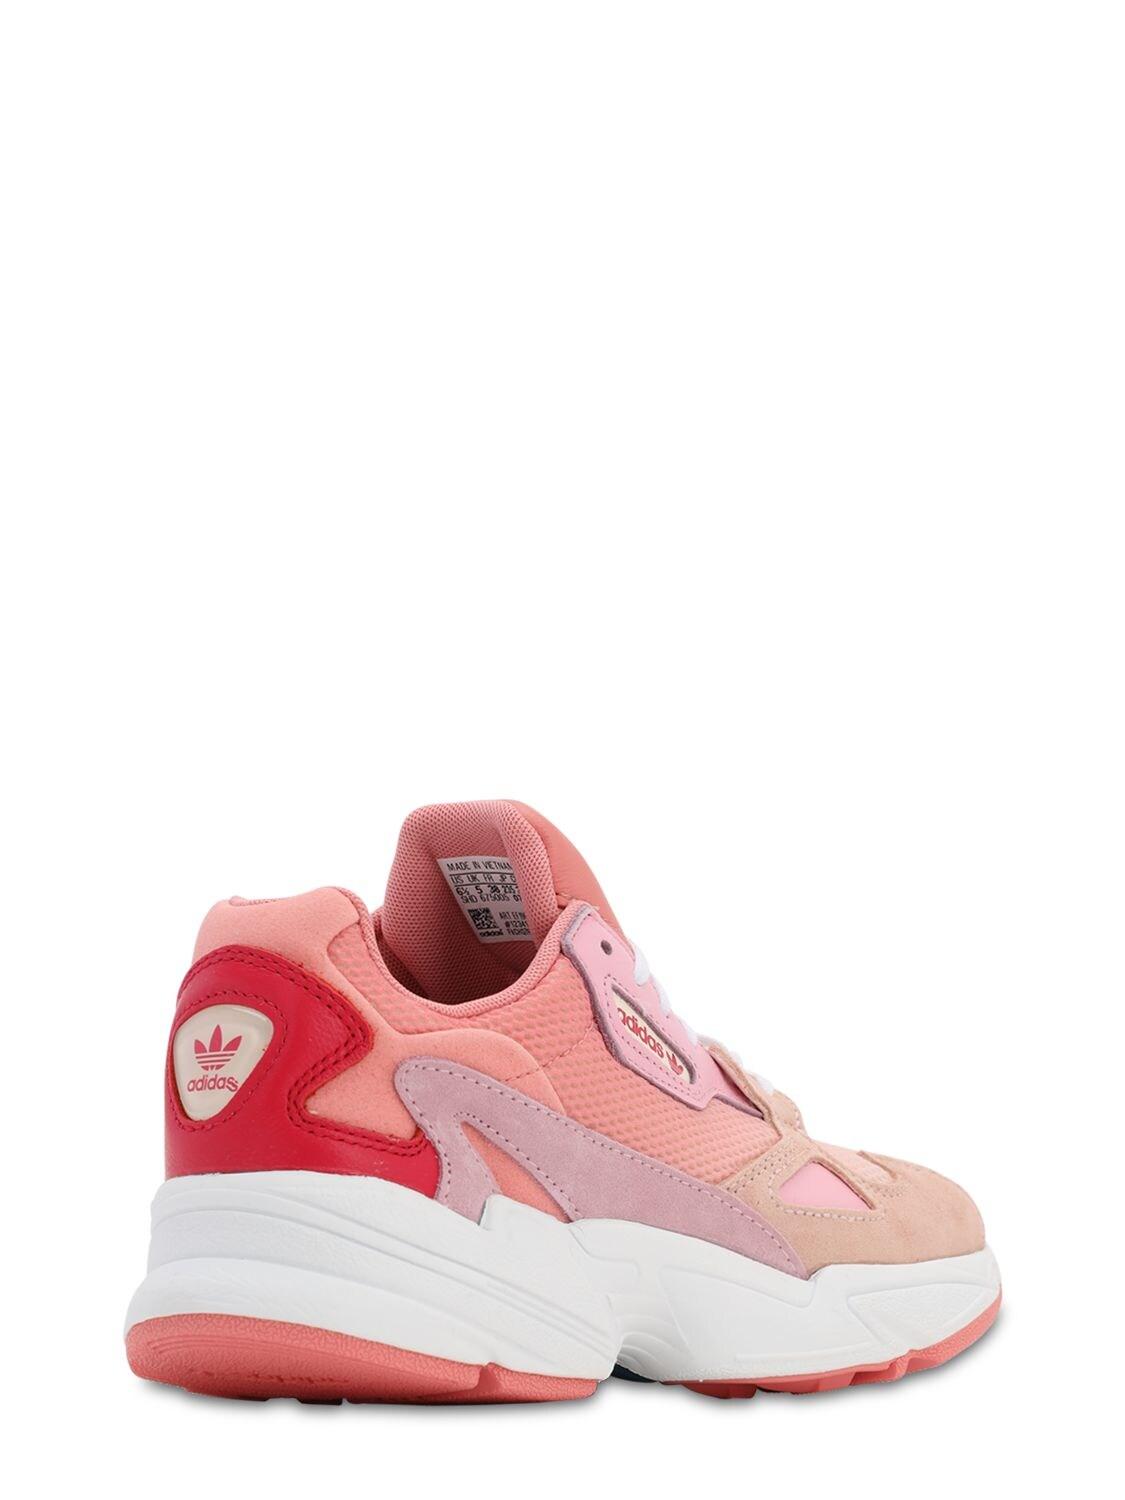 adidas Originals Leather Falcon in Peach/Peach (Pink) - Save 52% | Lyst